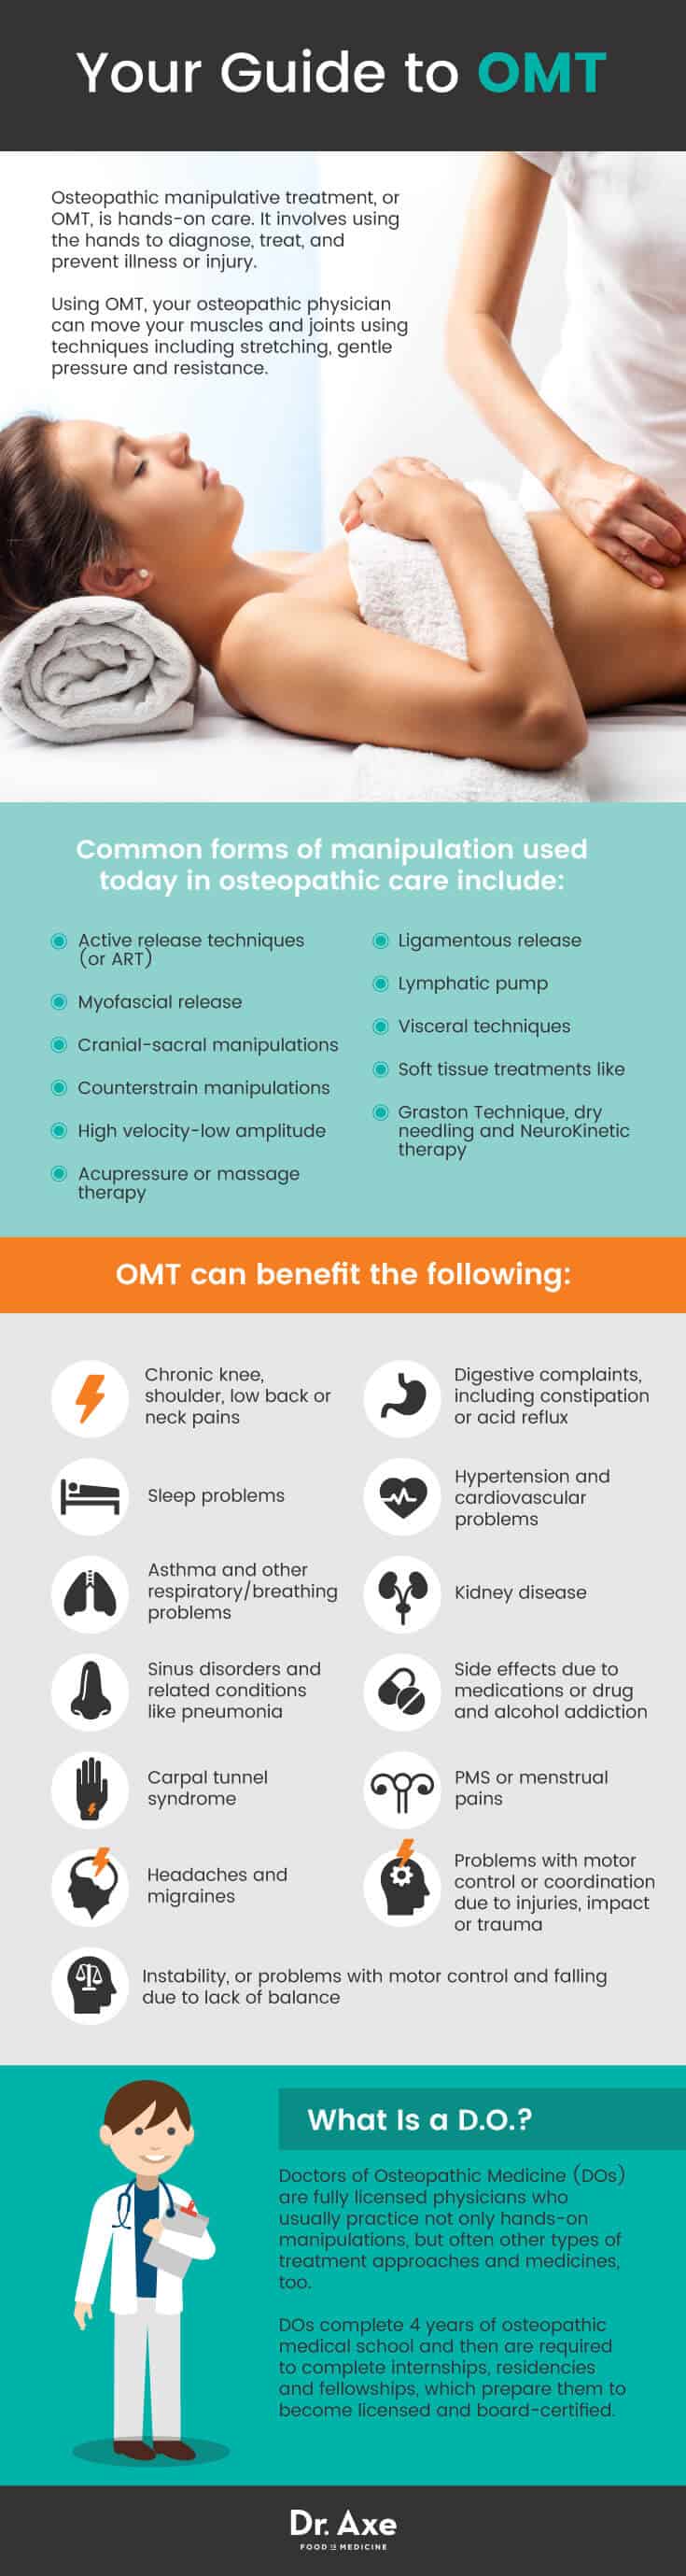 Guide to OMT - Dr. Axe